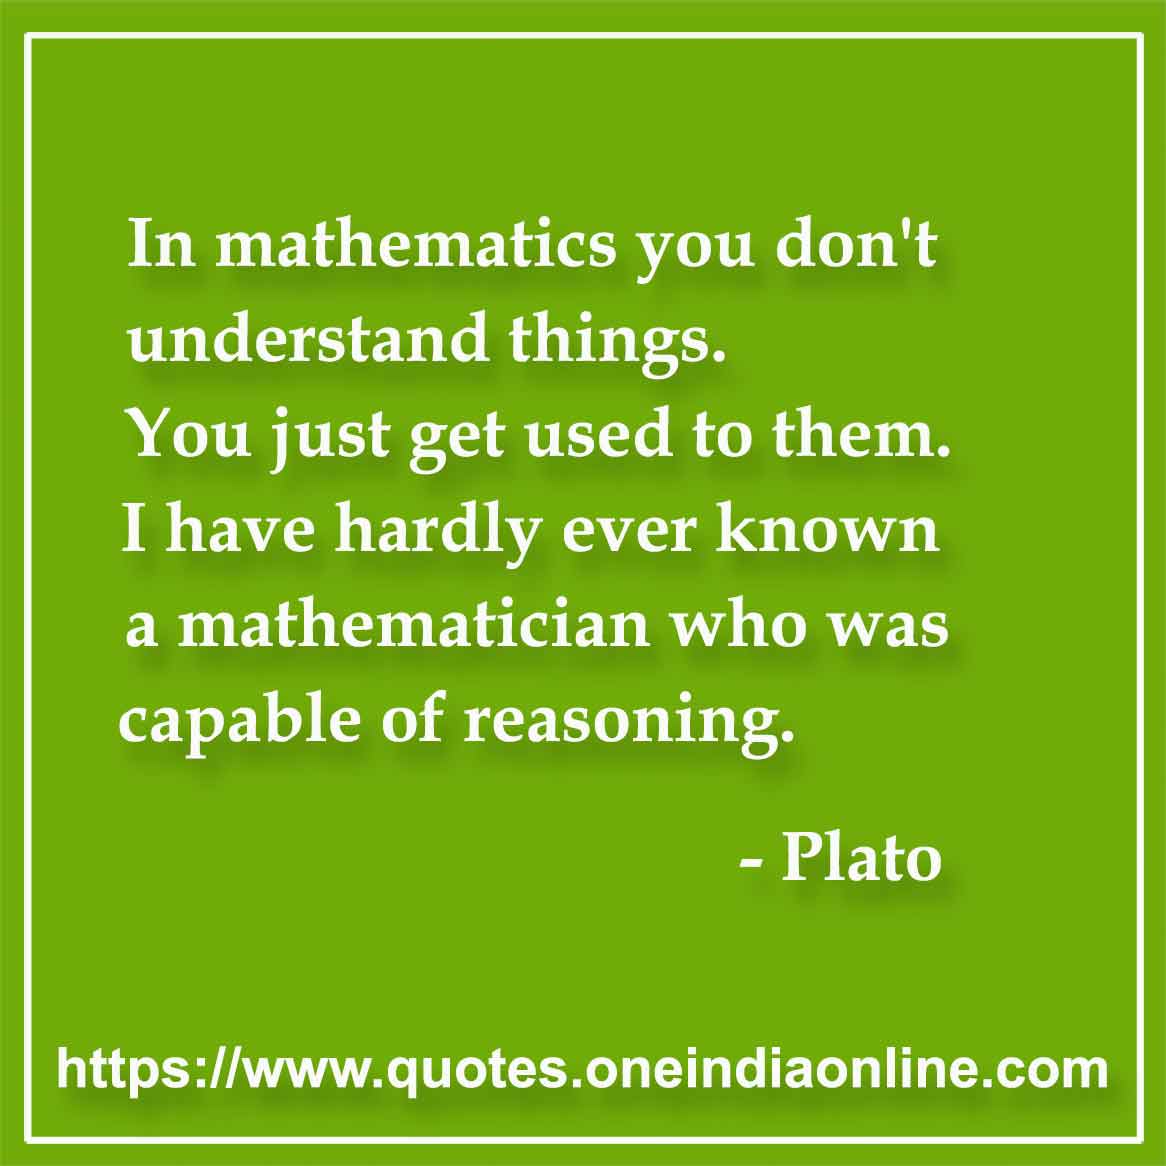 In mathematics you don't understand things. You just get used to them.
I have hardly ever known a mathematician who was capable of reasoning.

- Mathematics Quotes by Plato 